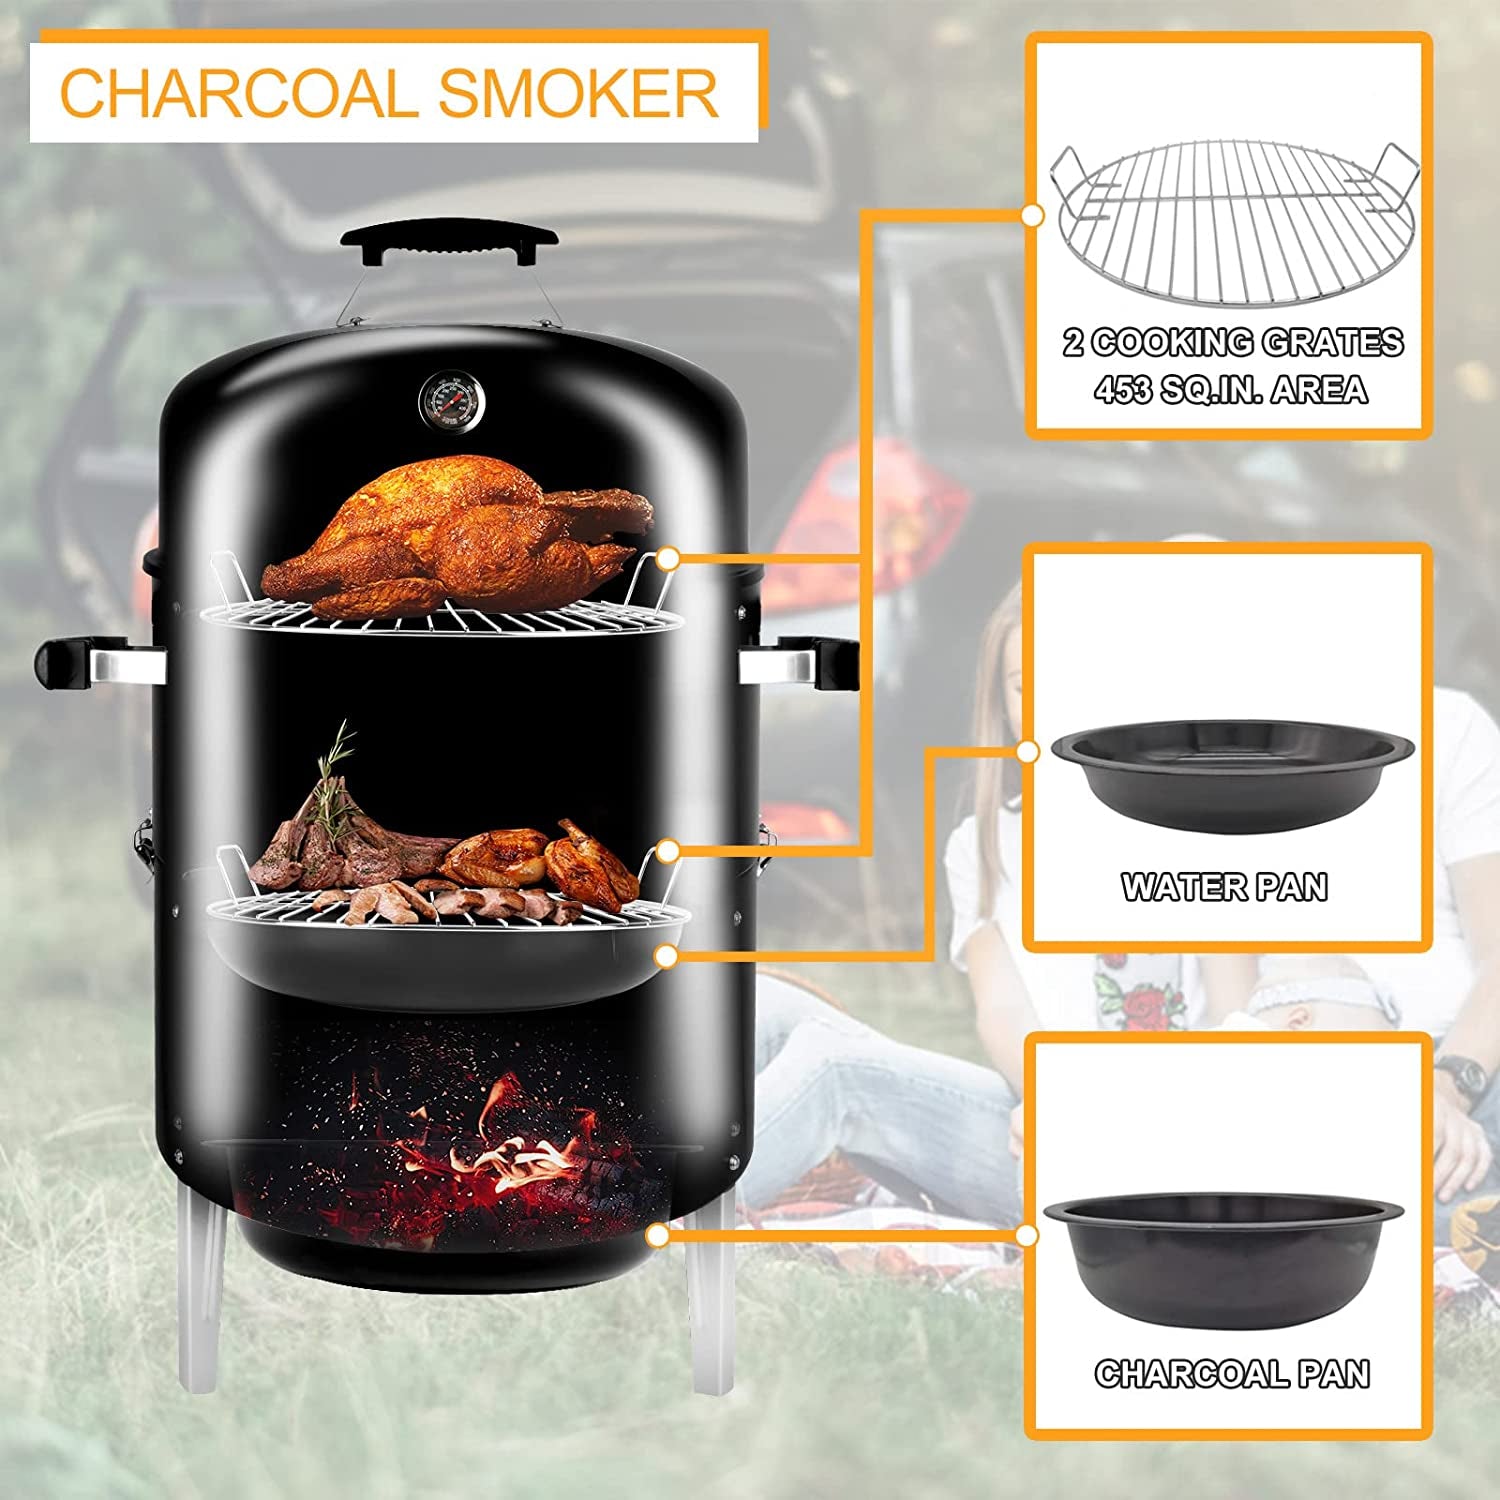 Portable Charcoal BBQ Grill with Smoker Combo: Ideal for Outdoor Cooking, Backyard Patio Barbecues, Camping, and Outdoor Smoking